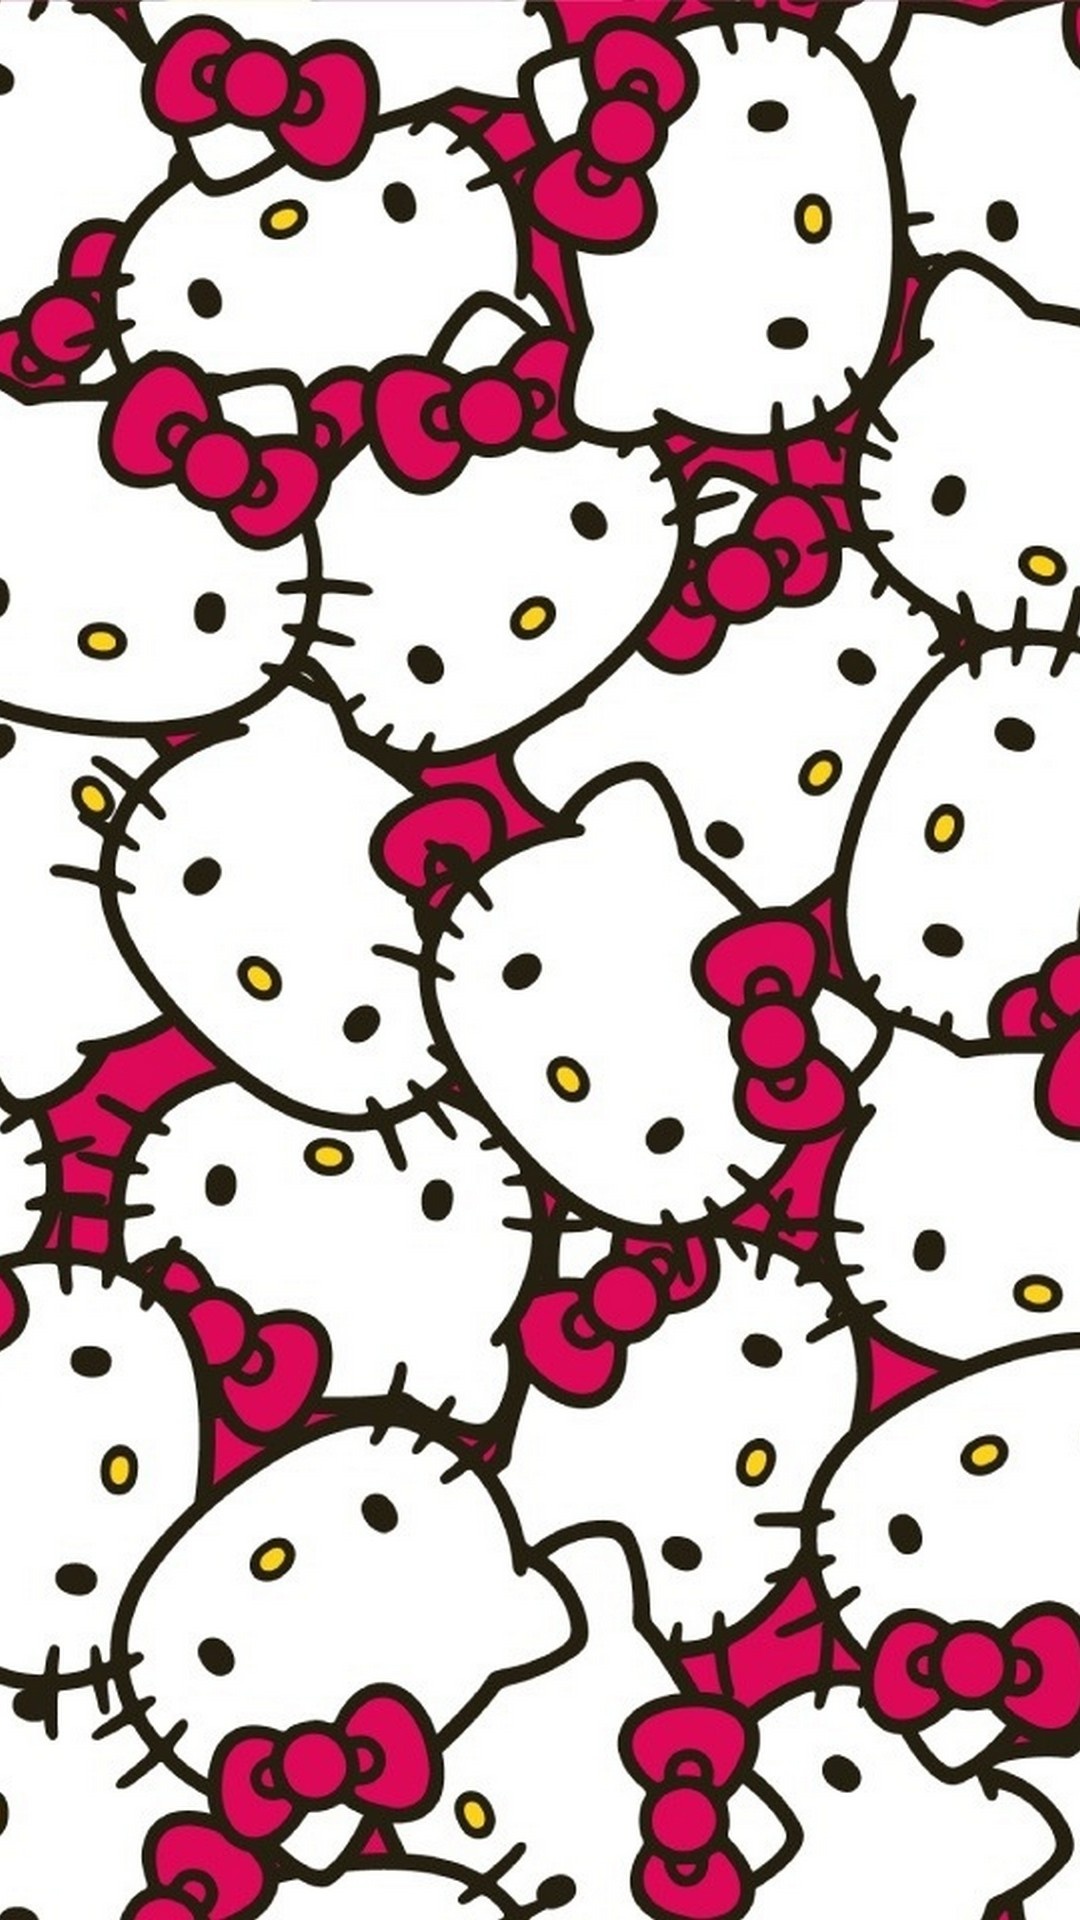 Hello Kitty: The character has a pet cat named Charmmy Kitty who wears a lace-trimmed bow on her head. 1080x1920 Full HD Background.